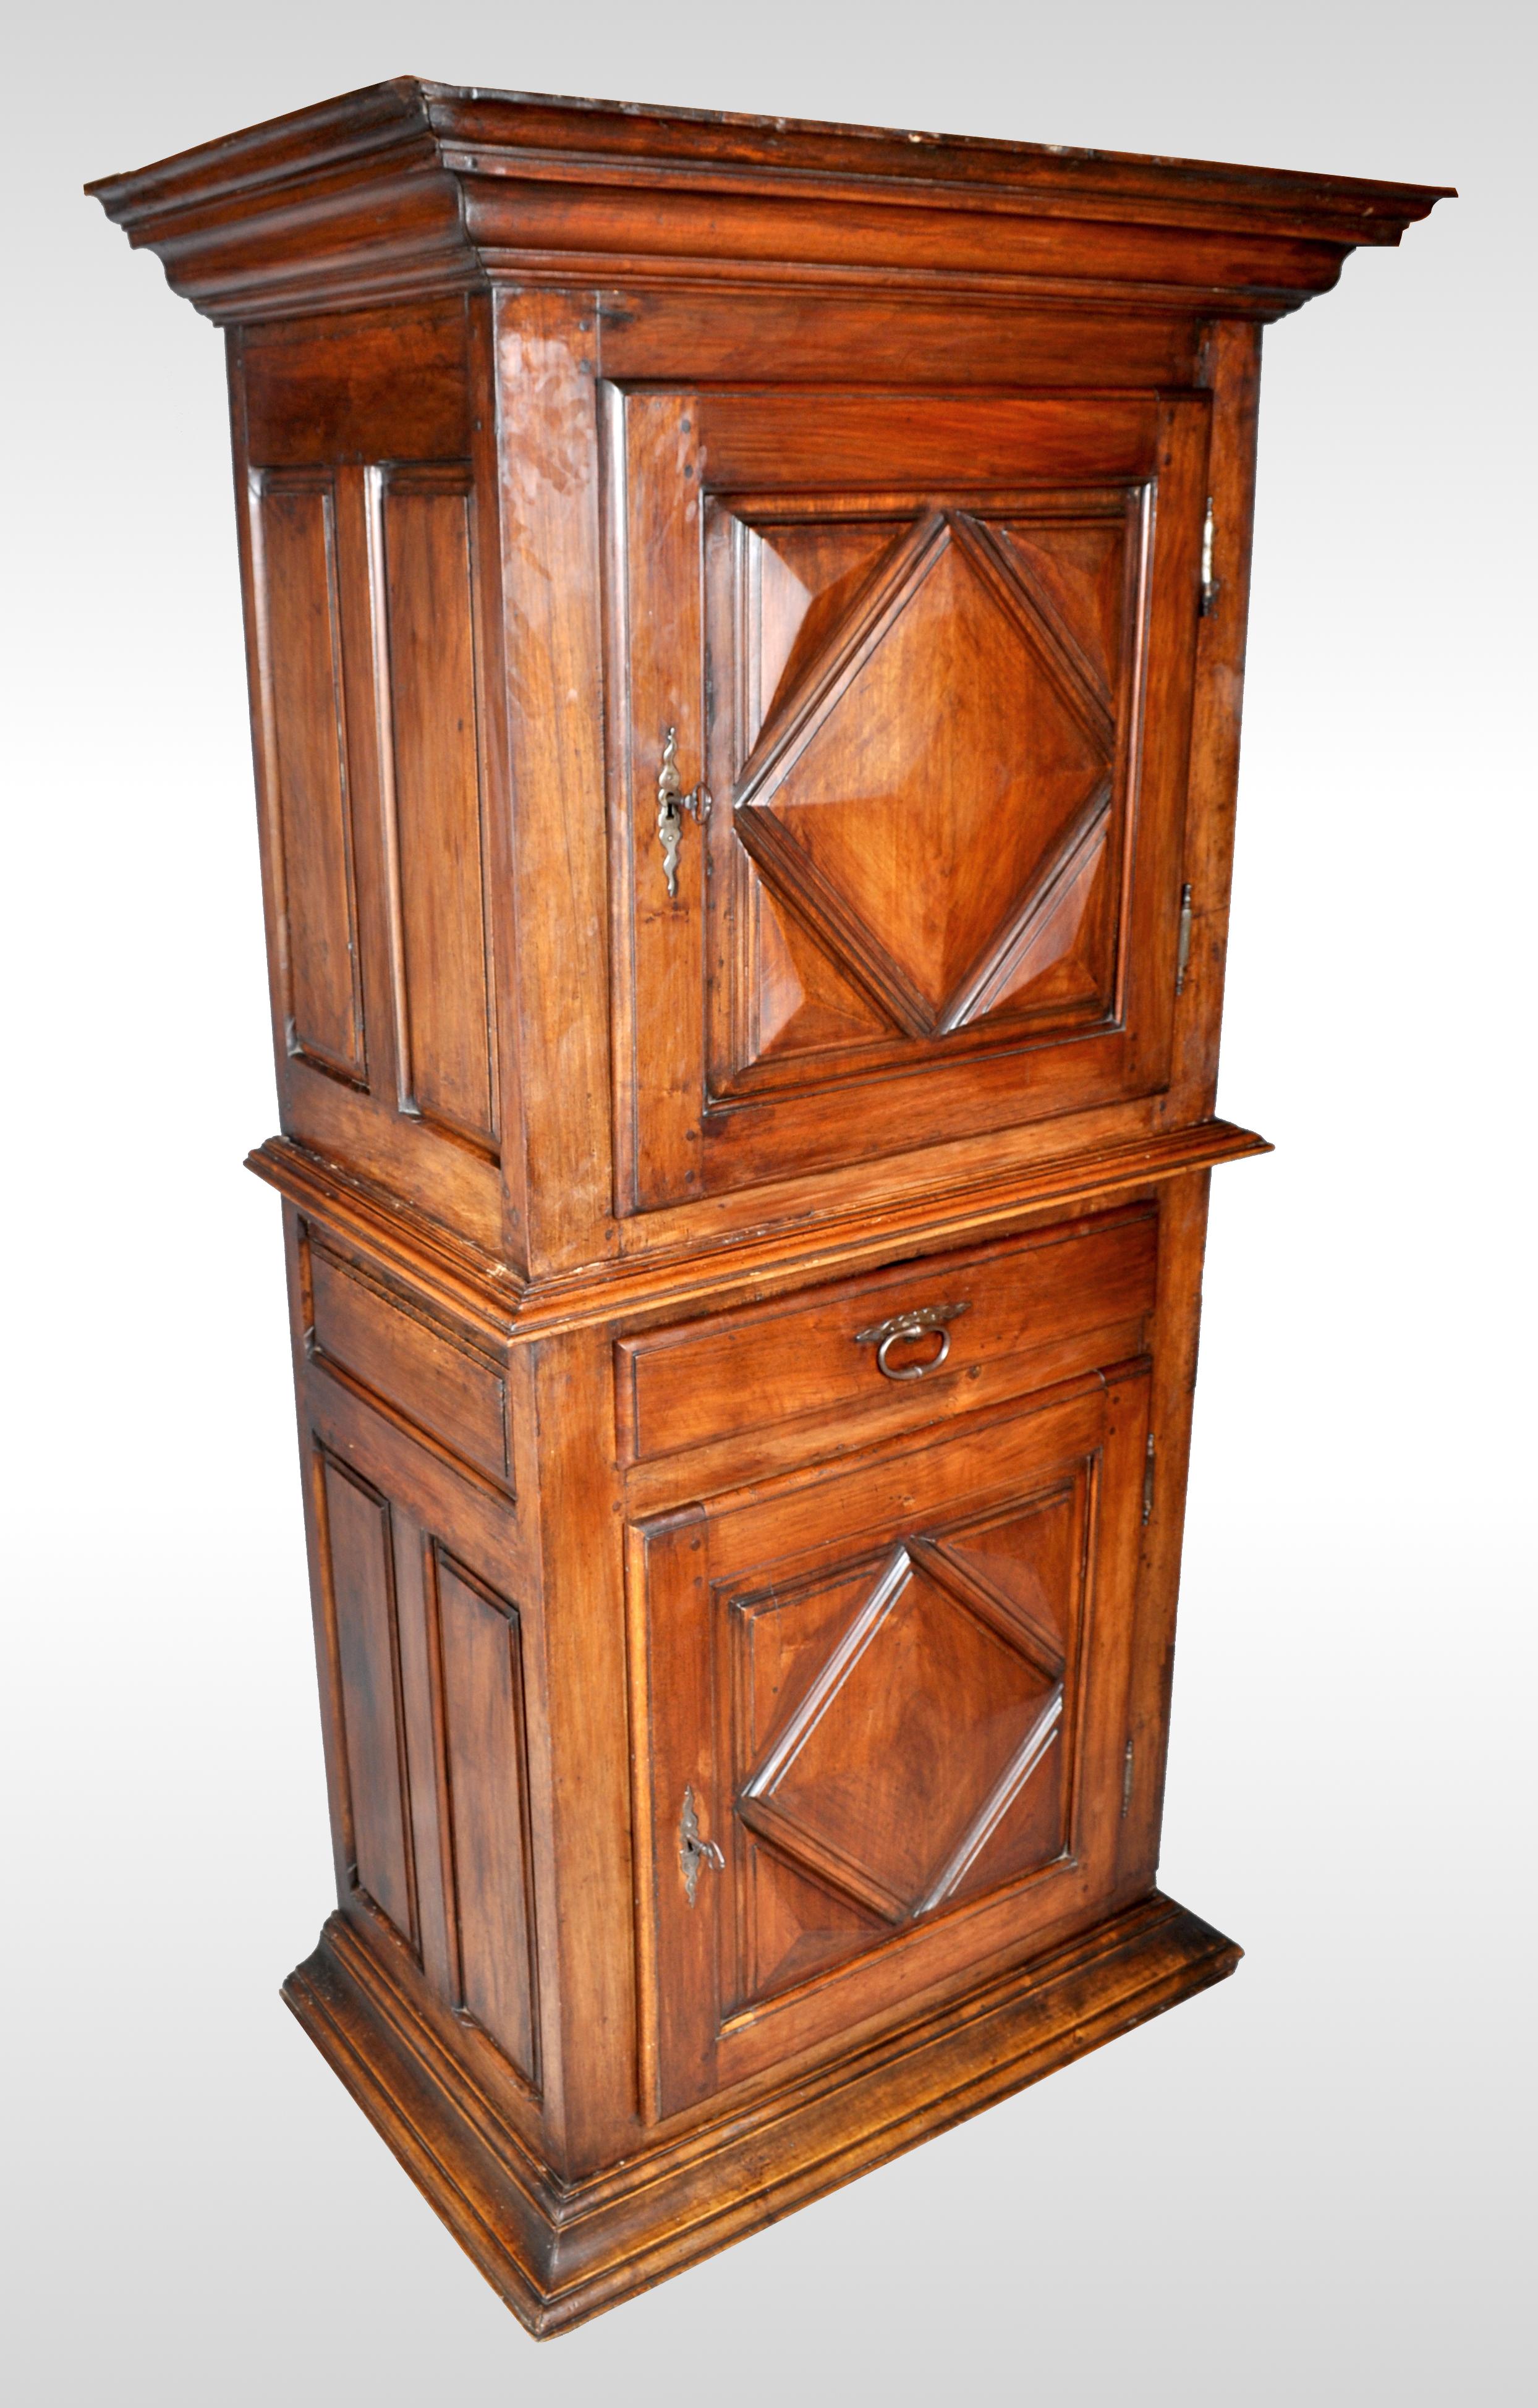 Antique French Louis XIII walnut cabinet / armoire / Bonnetiere, circa 1750. This large antique Bonnetiere from the Perigord region of France and having a stepped cornice with a single door below decorated with a deeply carved lozenge shape. The